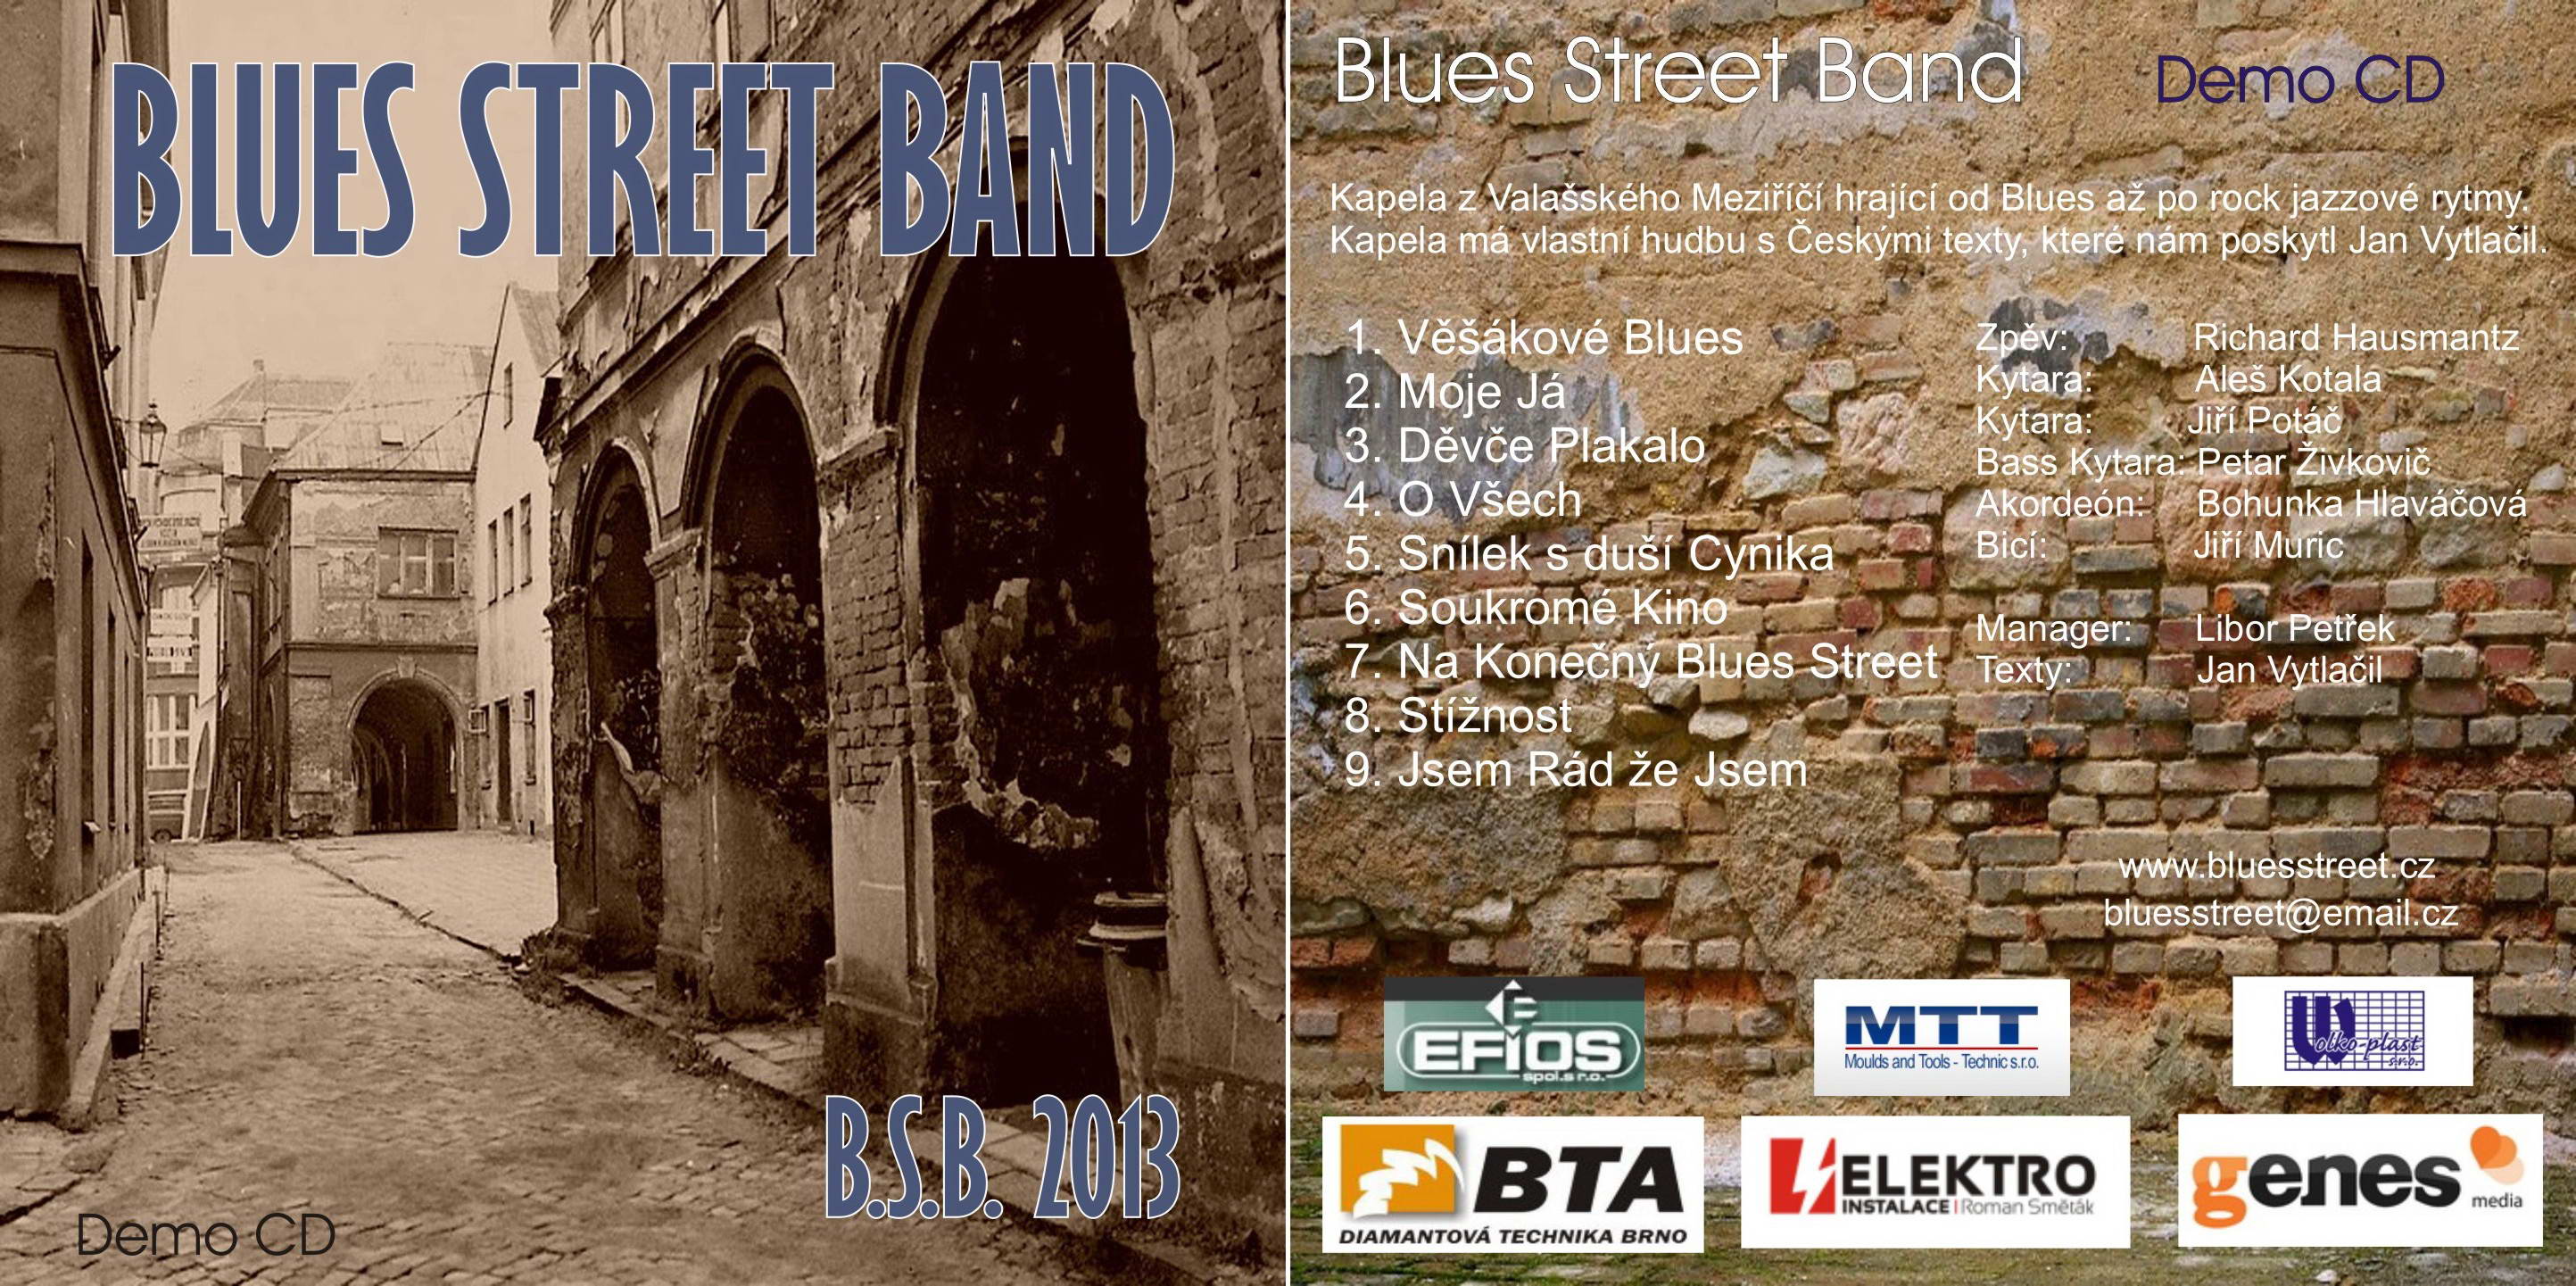 Blues Street band cover CD